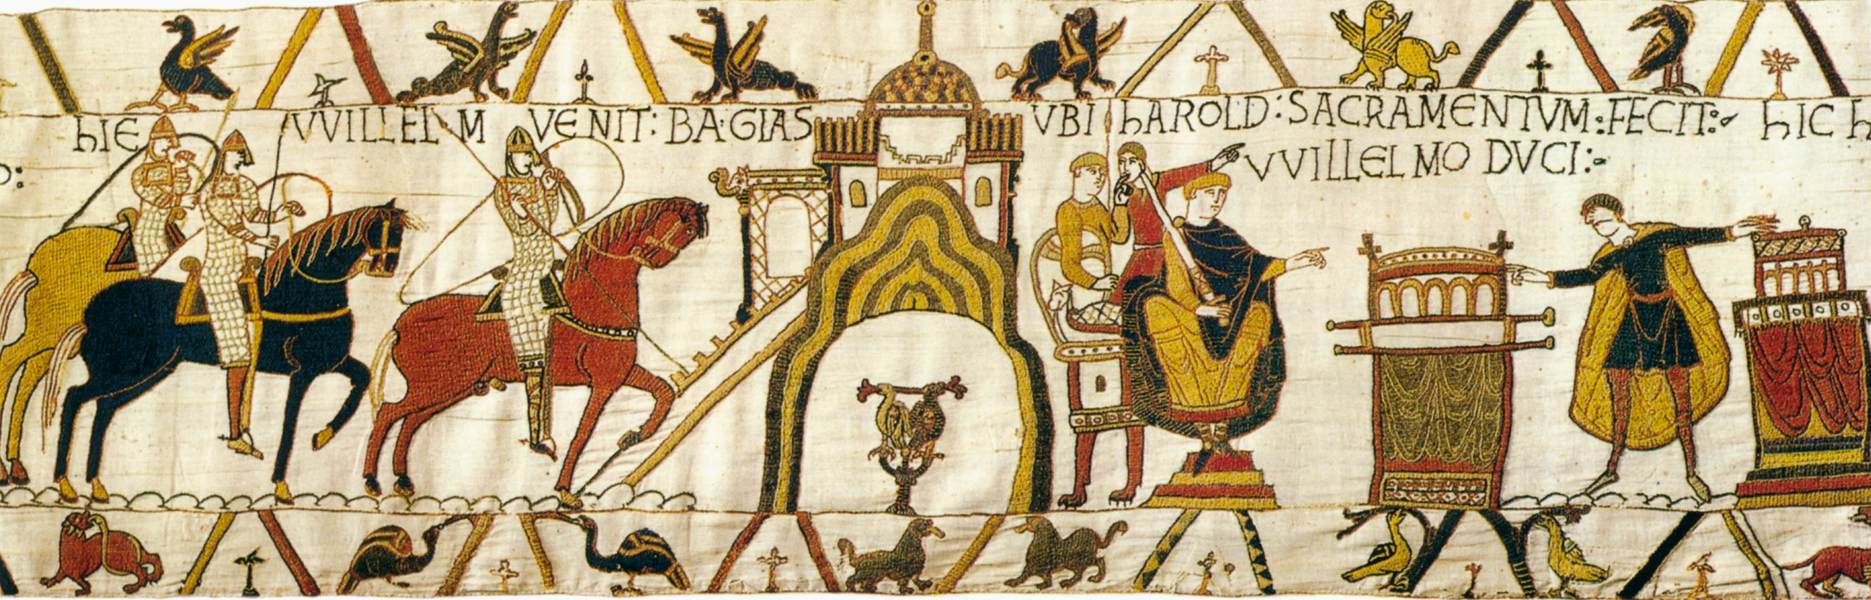 This scene depicts Duke William's arrival at Bayeux.